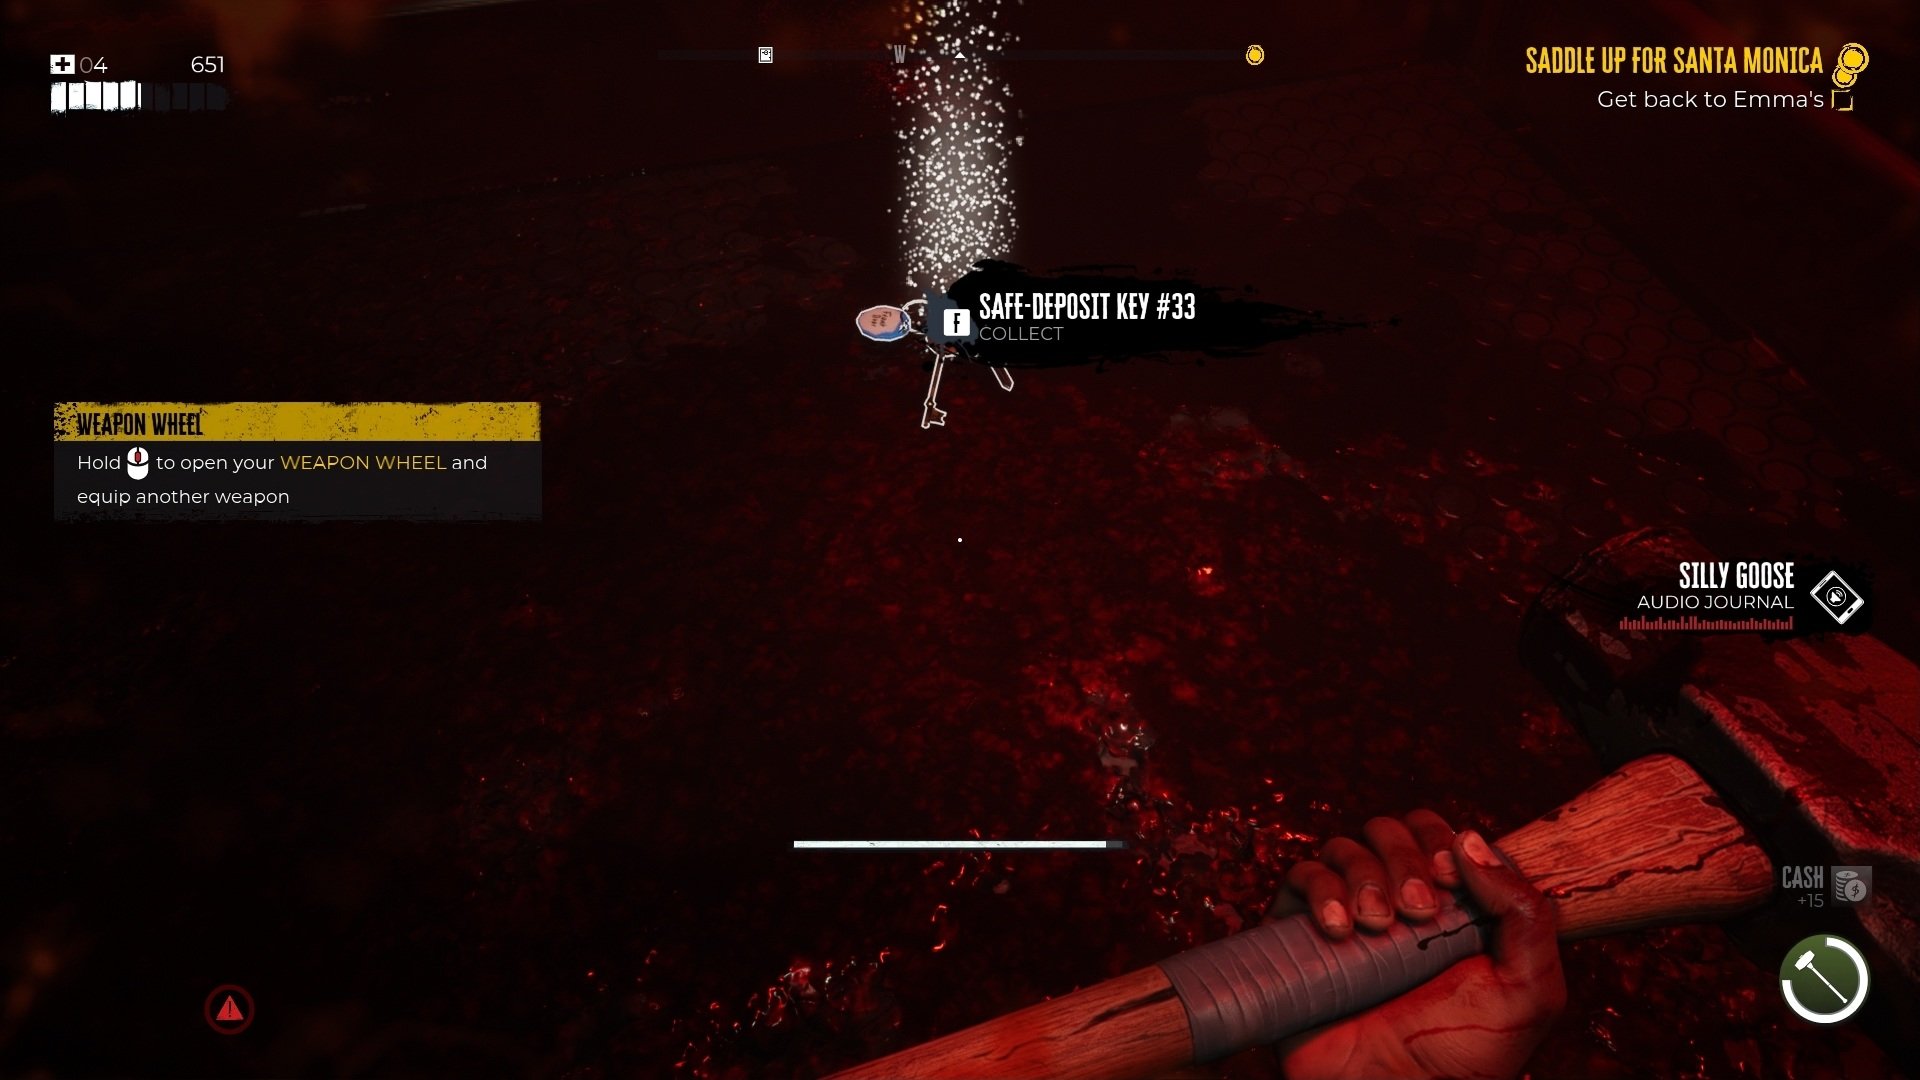 Dead Island 2 screenshot showing a key lying in an insane pool of gore and viscera. 